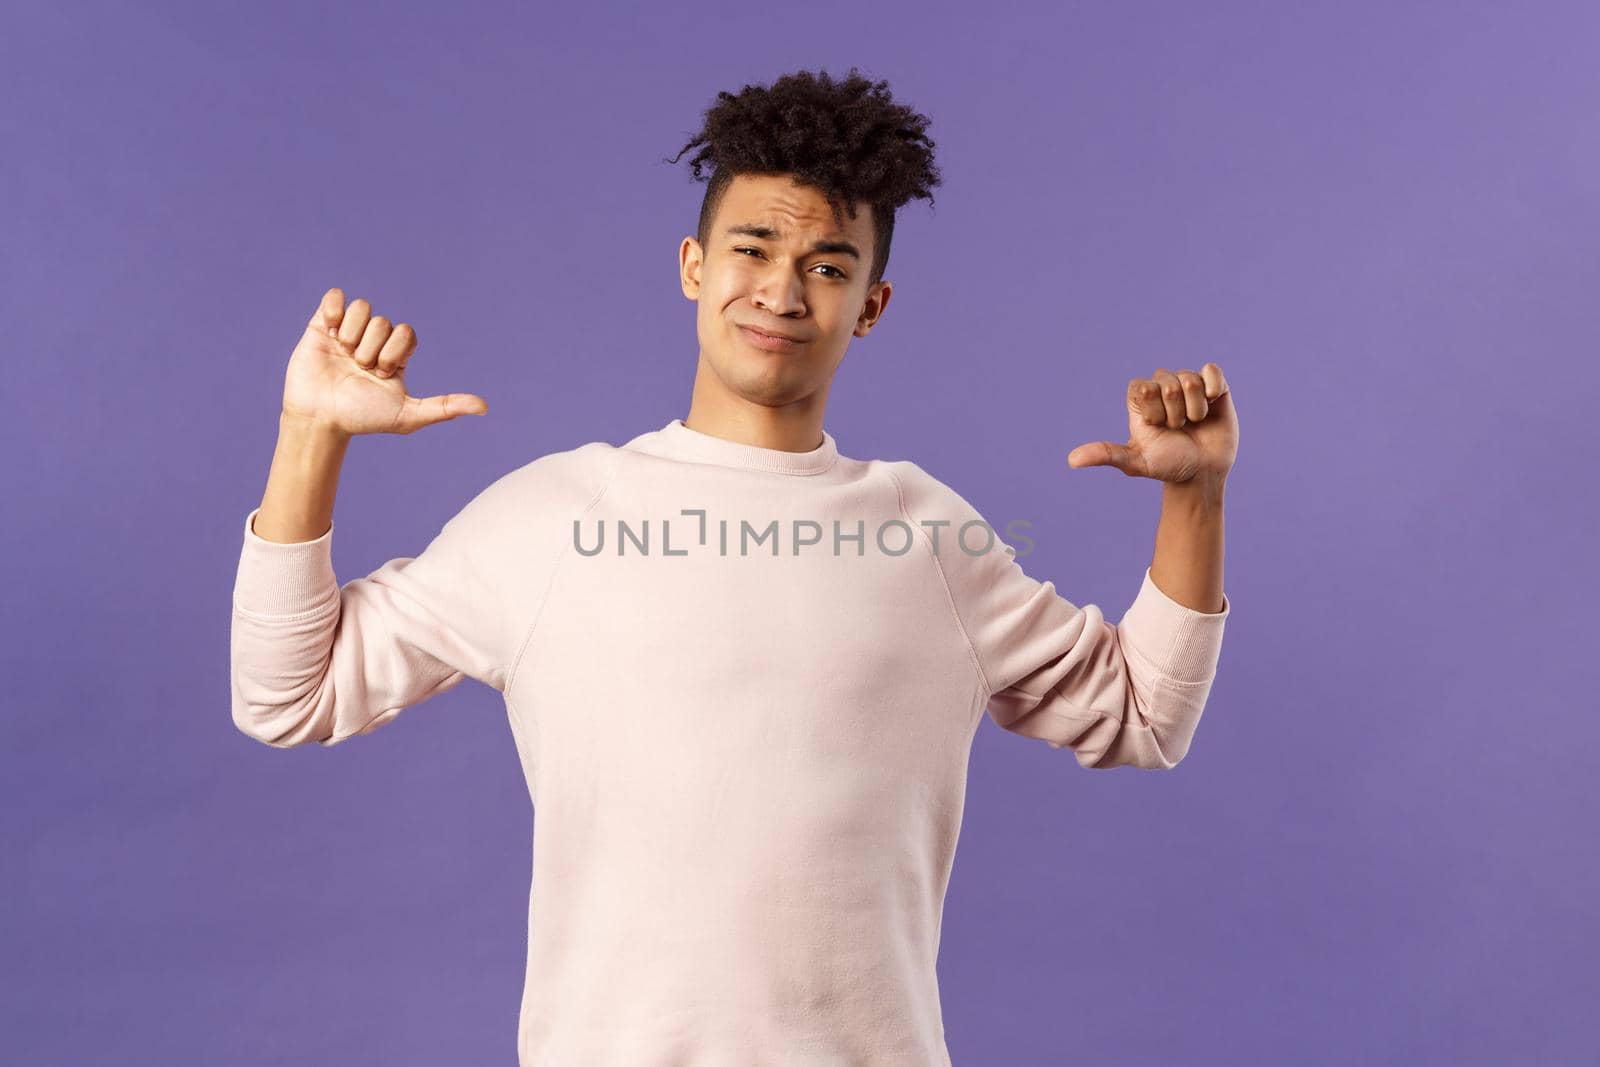 Portrait of boastful handsome young male student with dreads, bragging about how he workout in gym, show-off, pointing at himself and smirk self-assured, standing purple background.